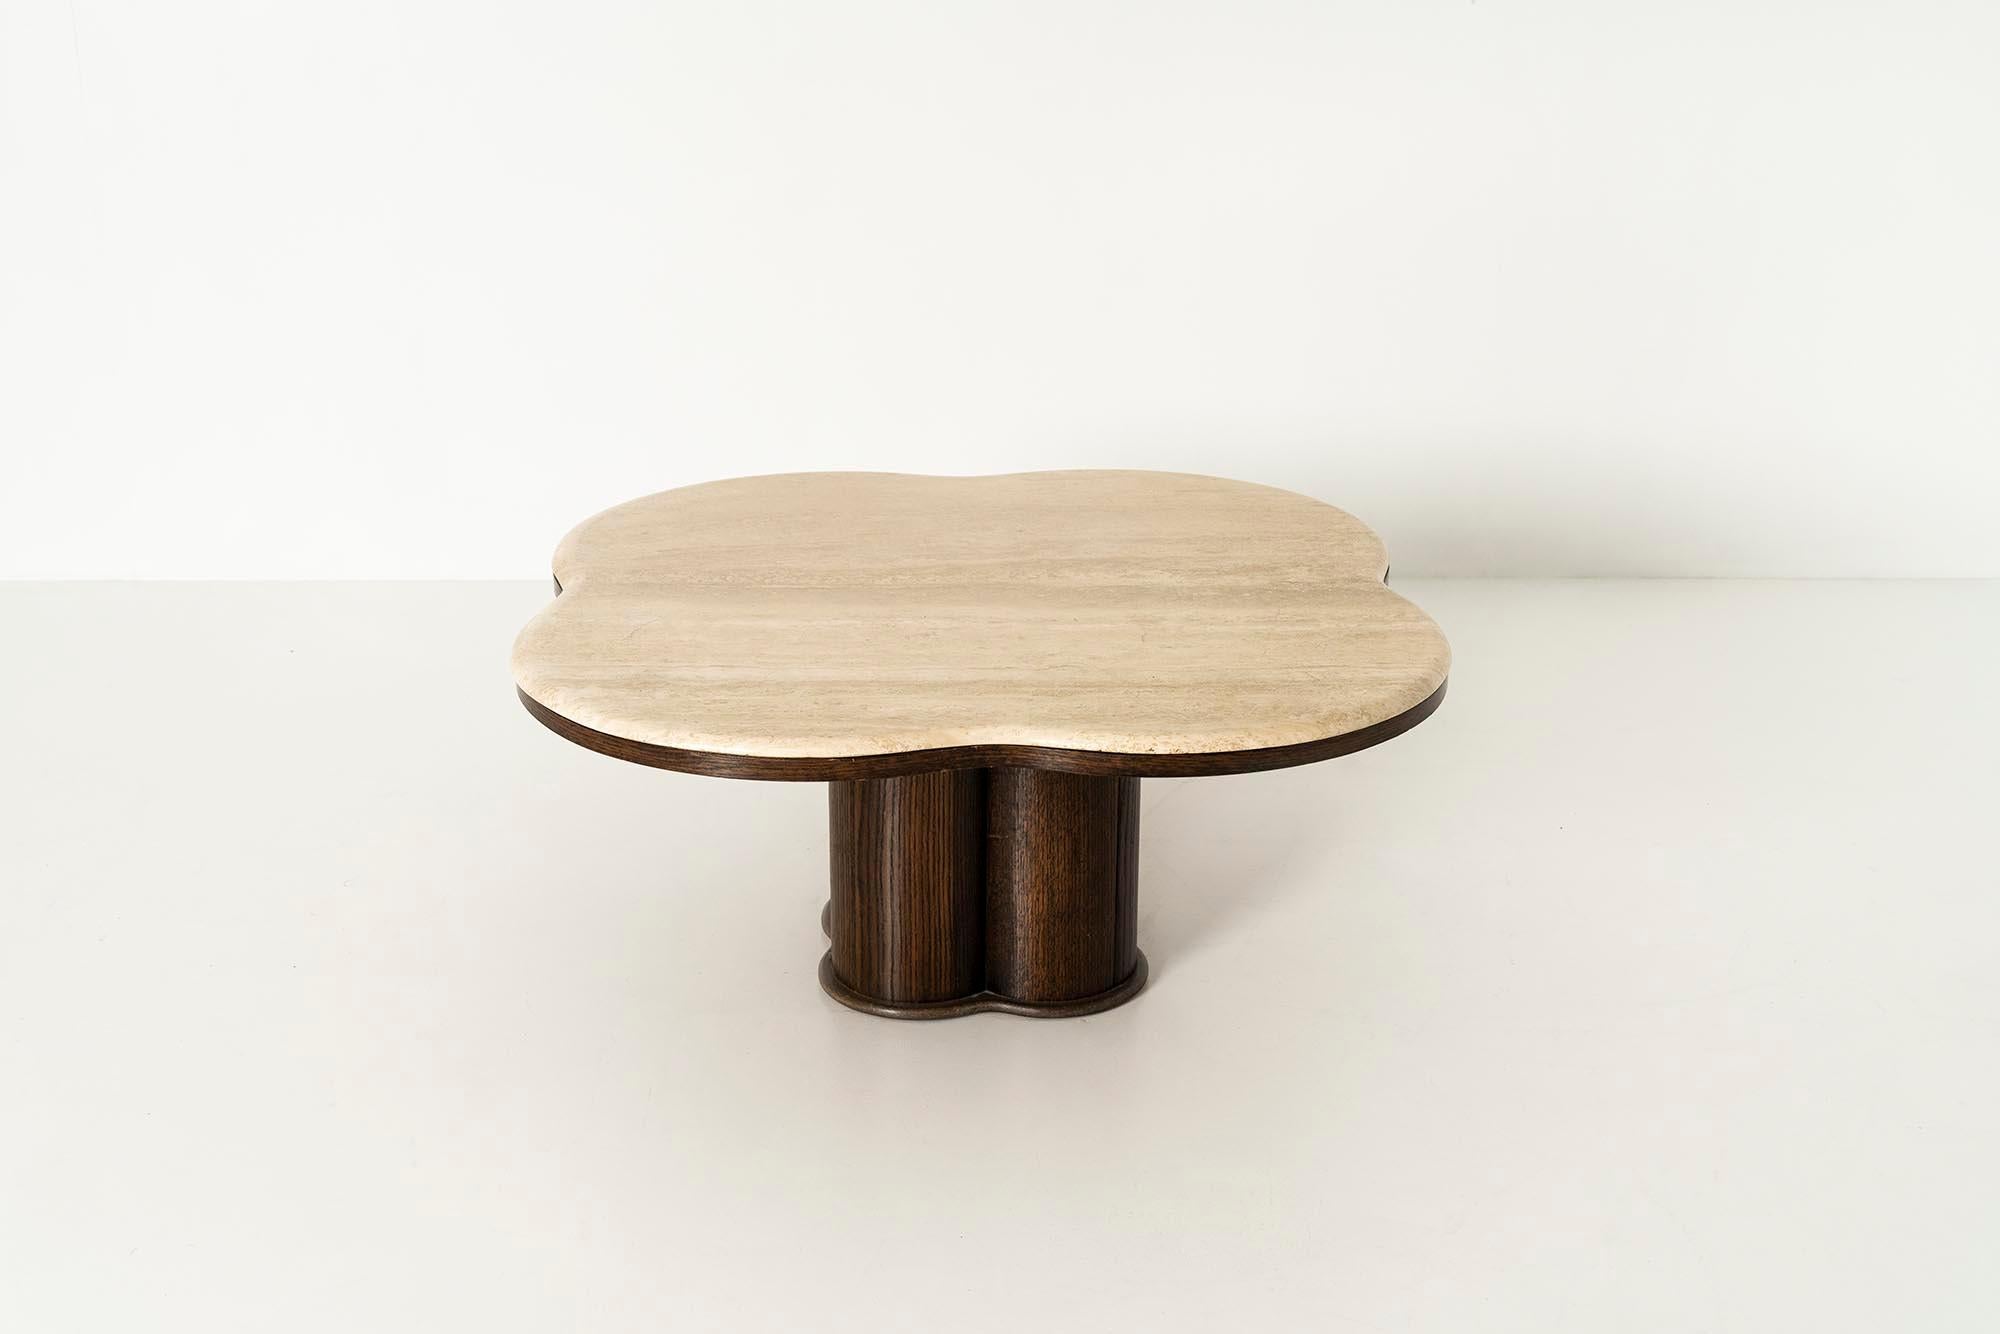 Stunning Coffee Table in the Style of Jean Royère Style from the 1970s. This table features a wooden base and a travertine top. The table has the shape of a clover. The wooden base features nice details with an edge completely at the bottom. We love